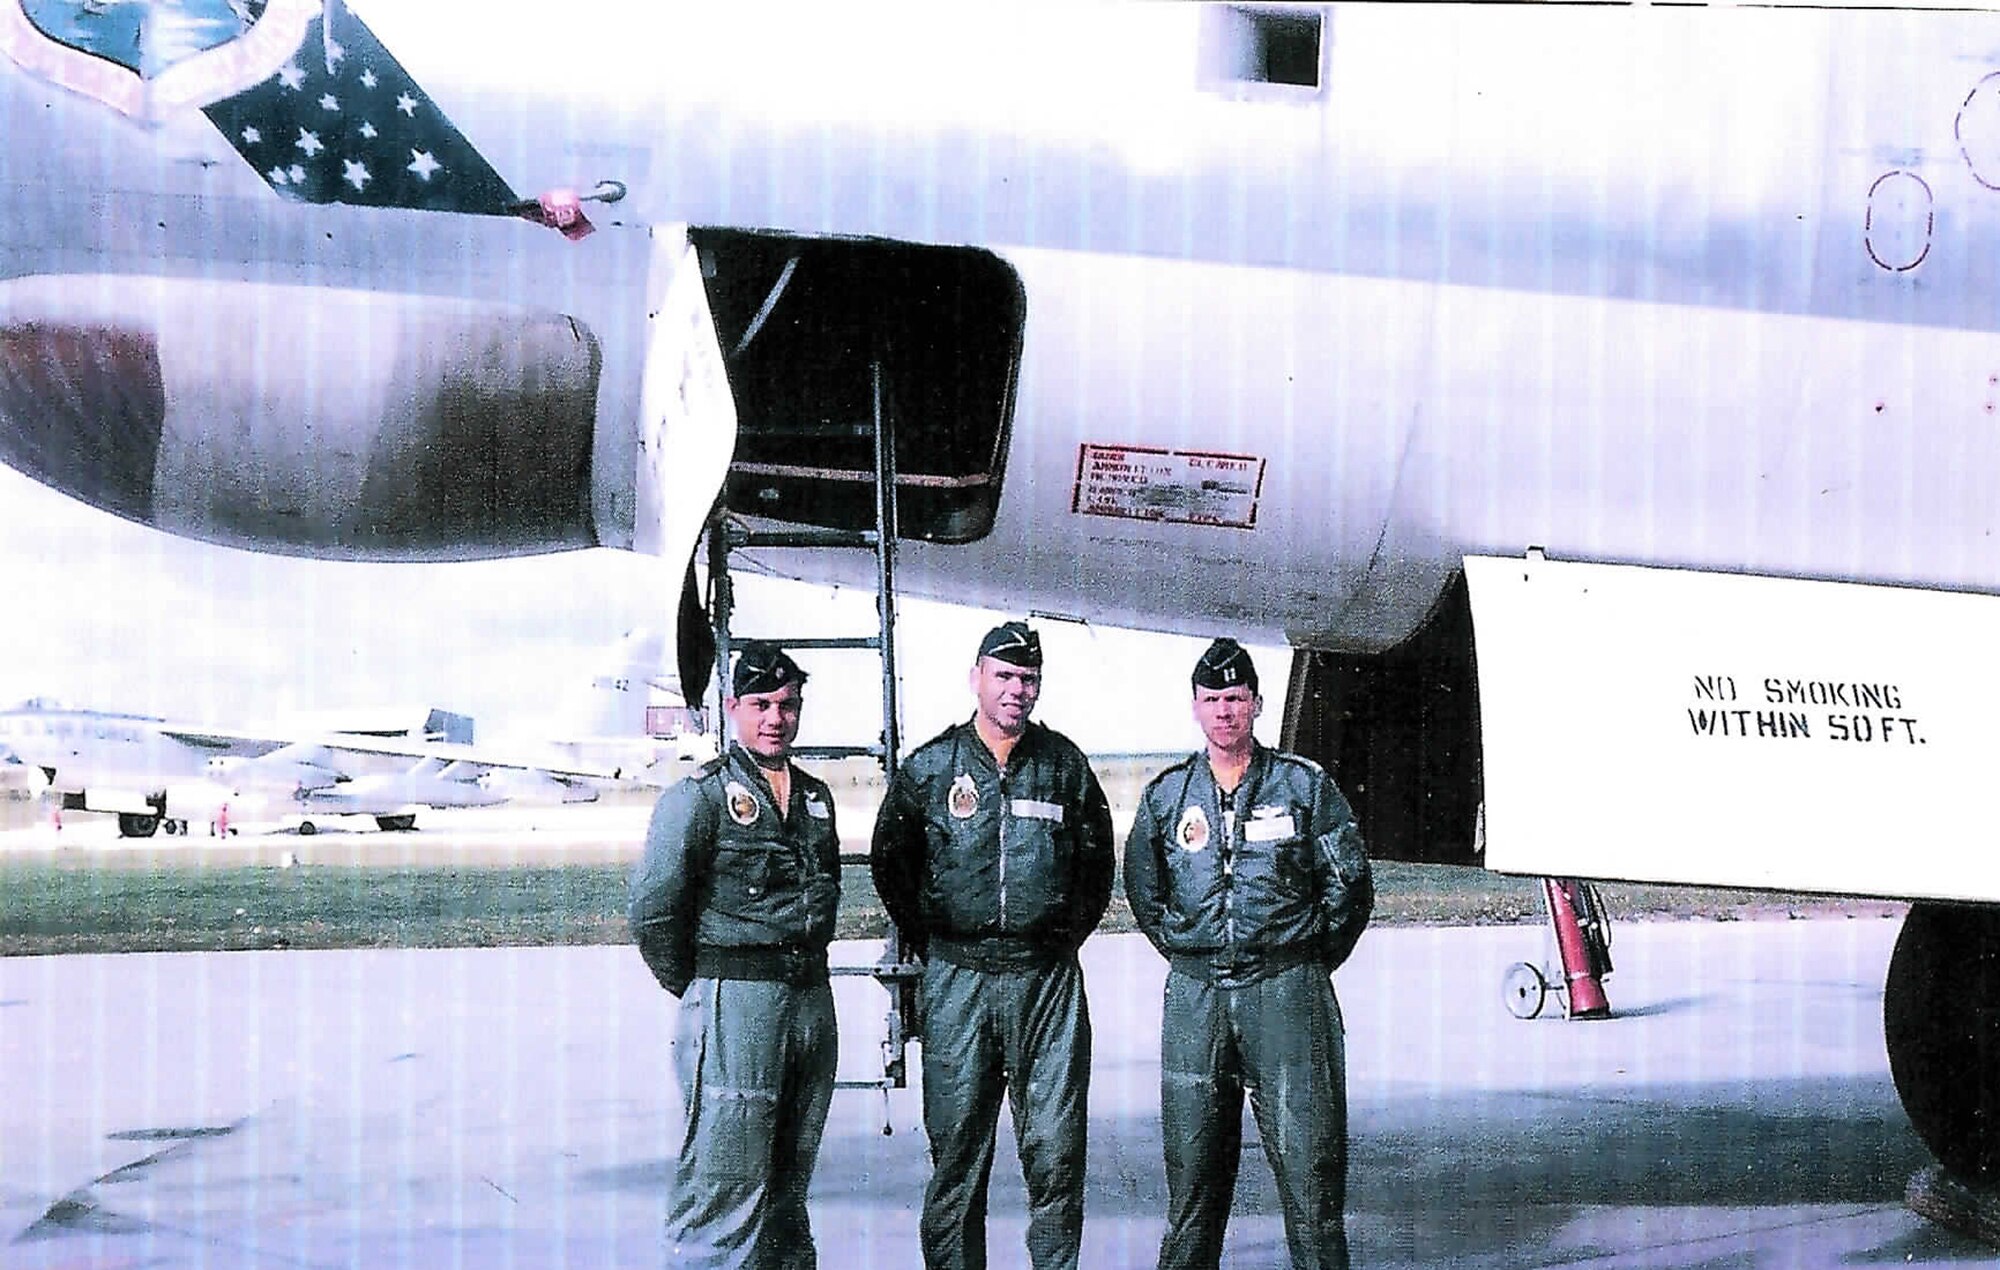 Lieutenant Welch's grandfather retired Col. Don Sprague (center) poses in front of a B-47 in 1962 just before he started flying the B-52. First Lt. Daniel Welch has some big shoes to fill; four of them to be exact. Lieutenant Welch, a pilot with the 11th Bomb Squadron at Barksdale Air Force Base, La., will become the third consecutive generation of B-52 flight officers in his family. (courtesy photo)